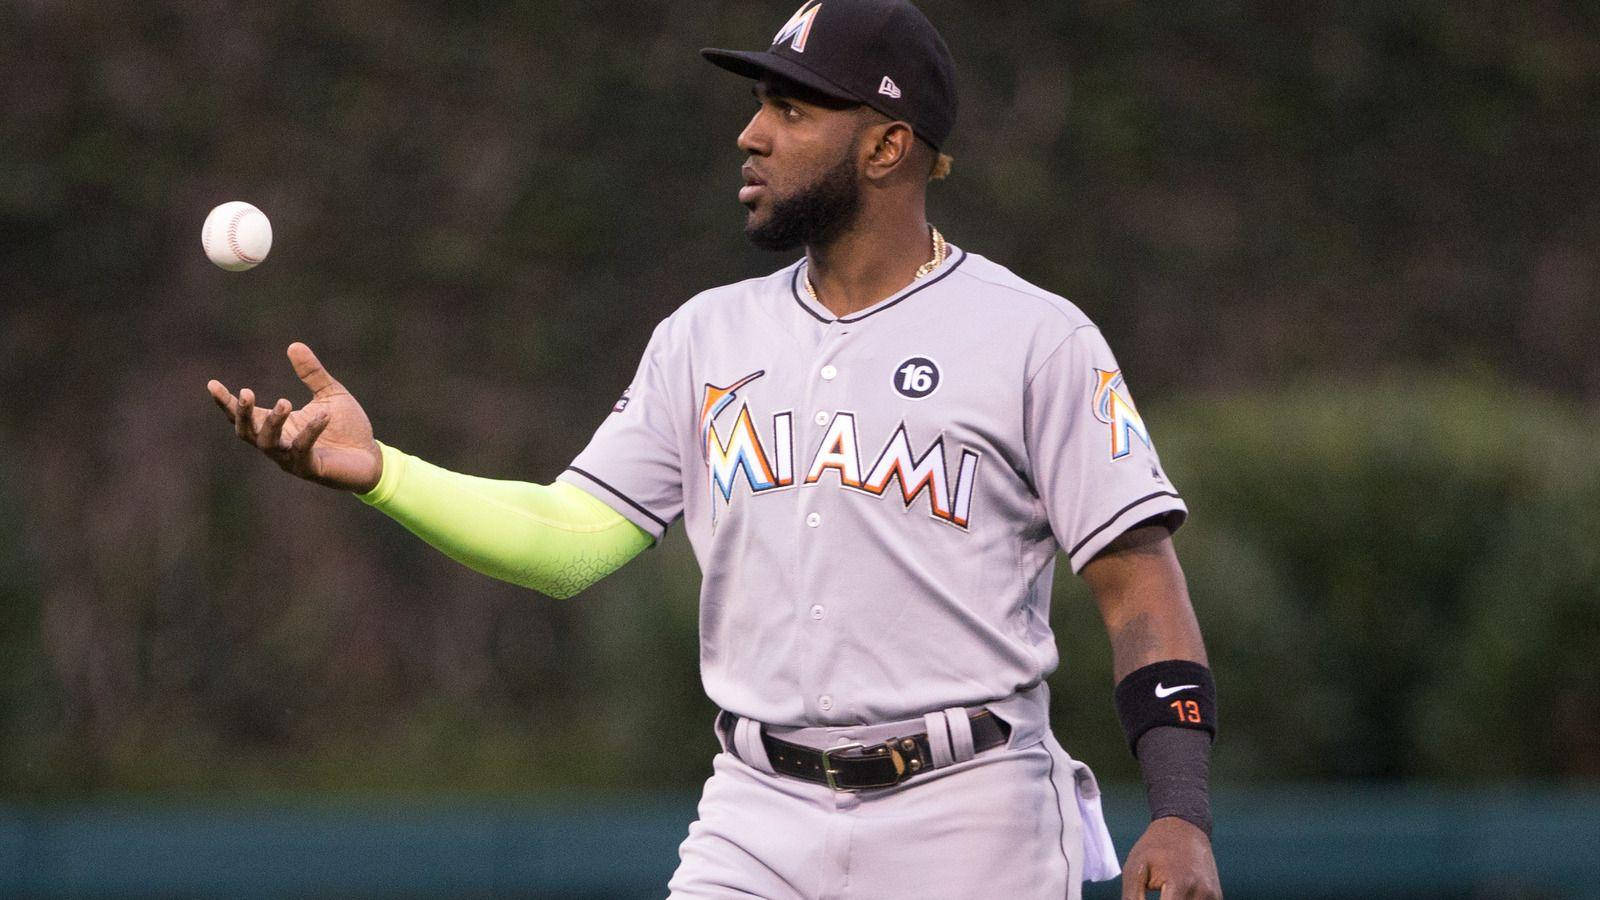 Download Marcell Ozuna With Ball In Air Wallpaper